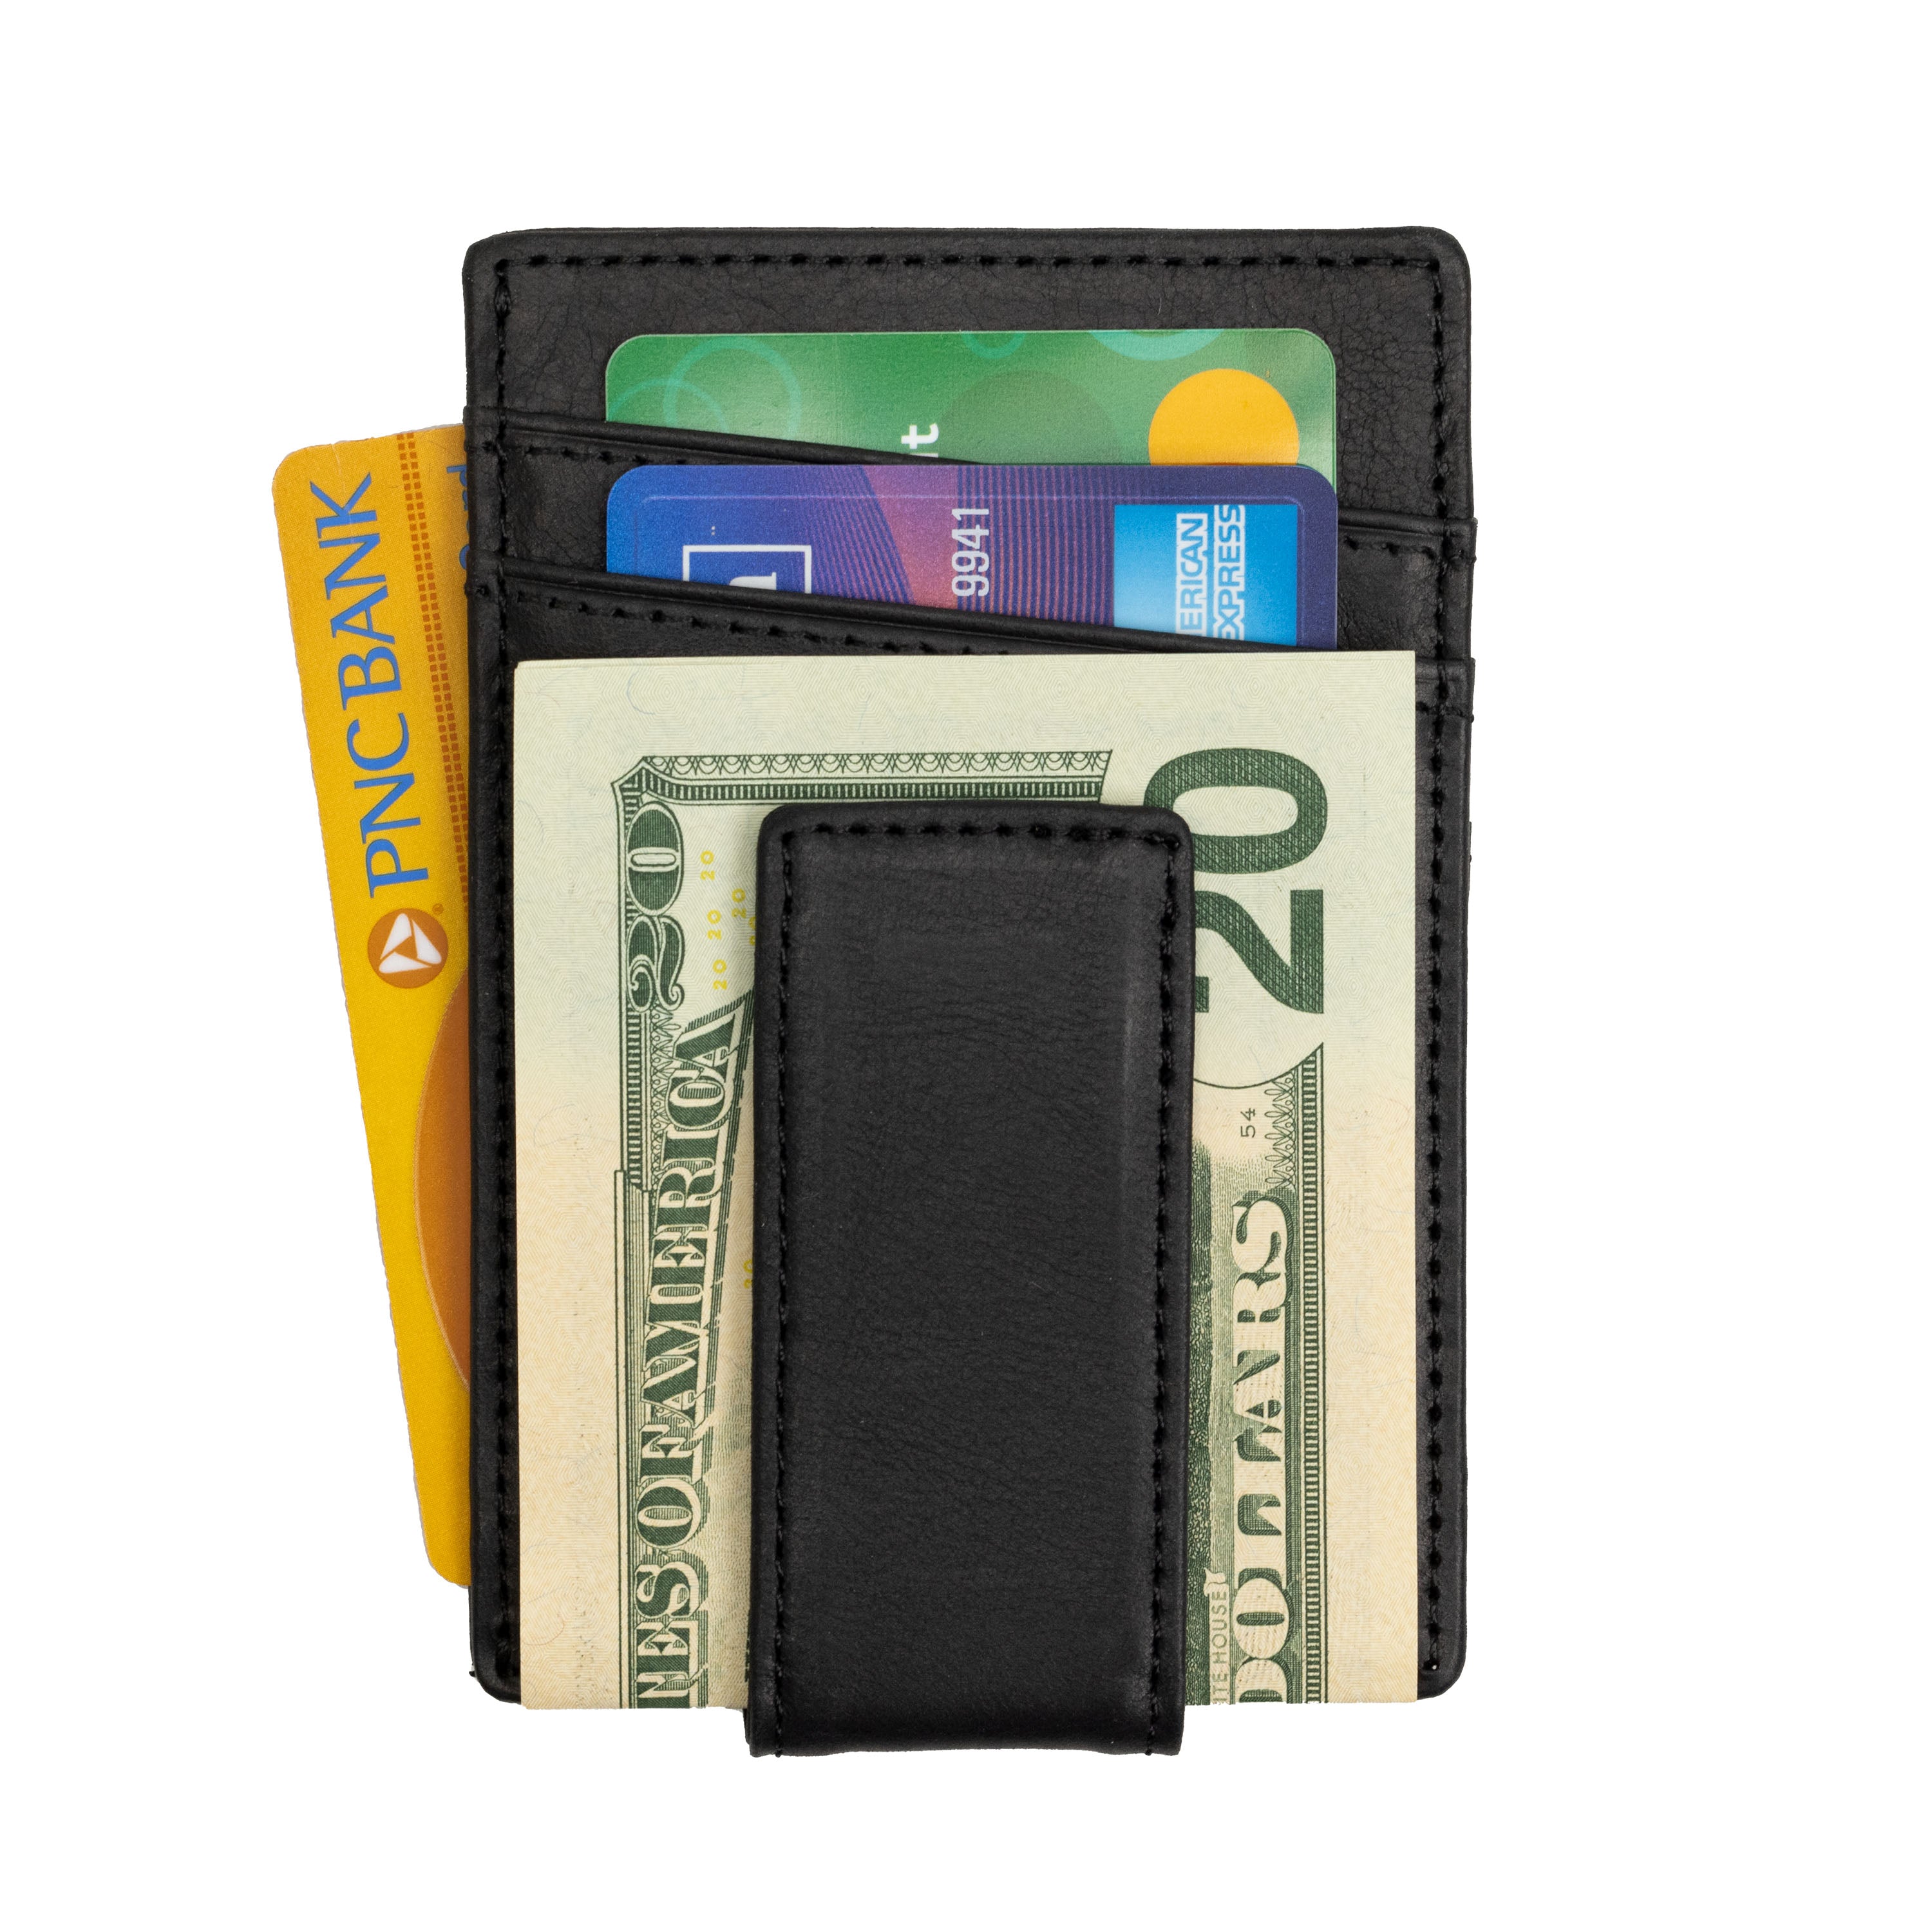 Card case with money clip